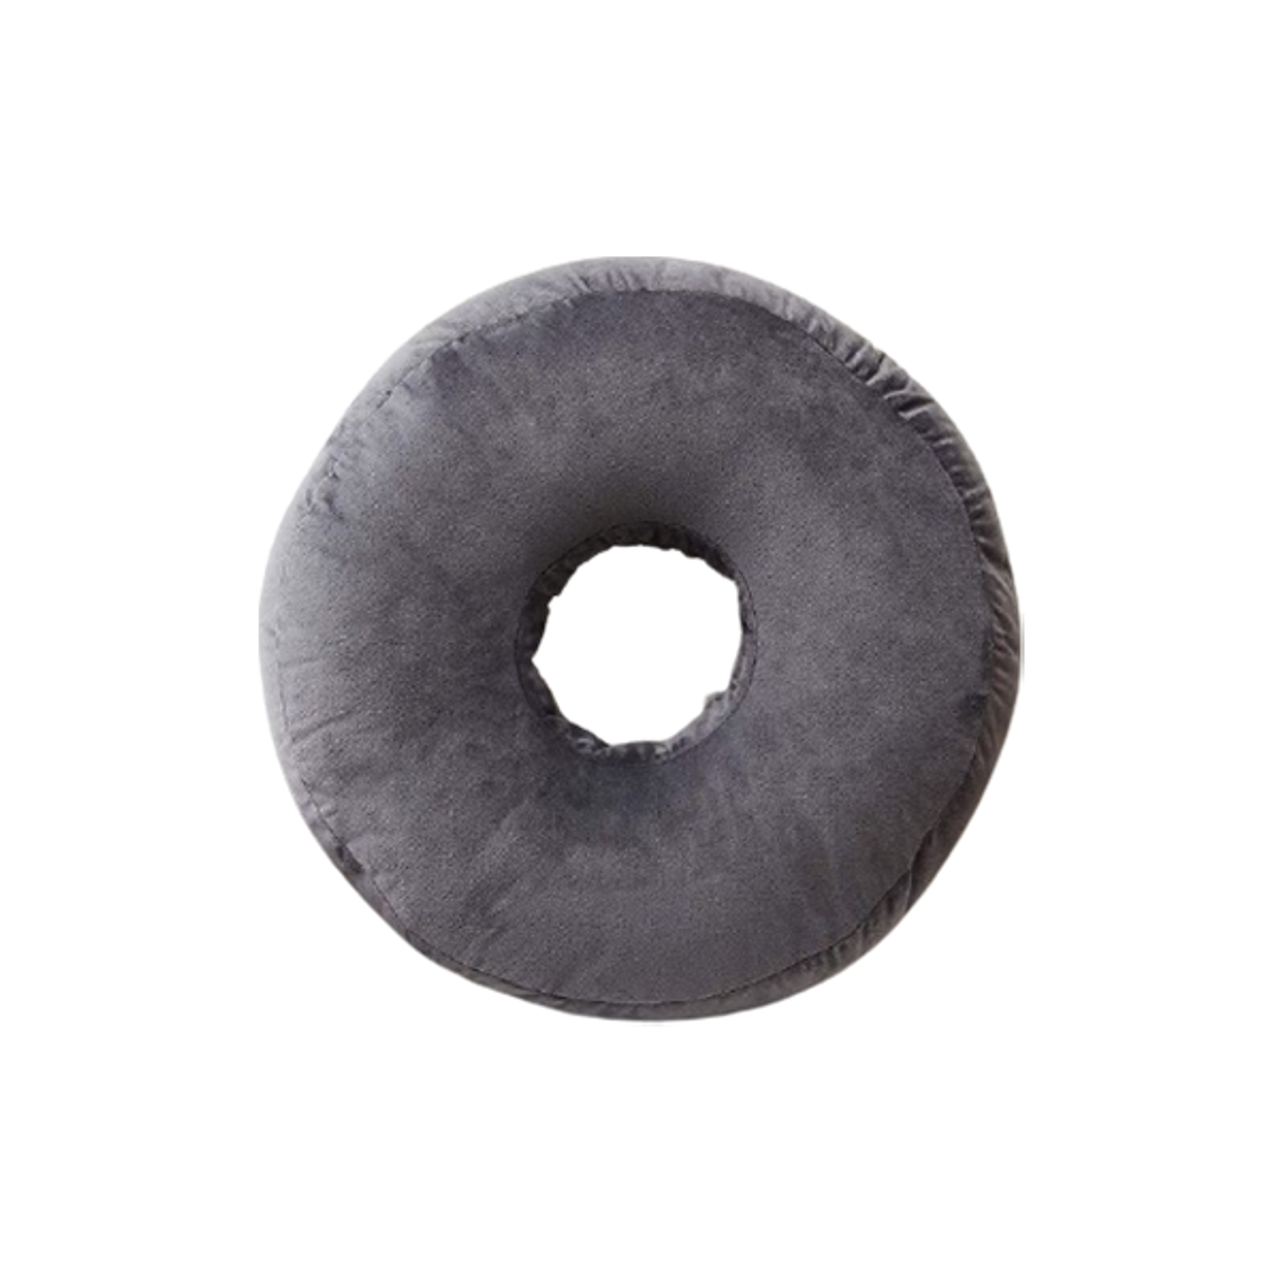 Cheer Collection Round Donut Pillow - Super Soft Microplush Doughnut Pillow  and Comfy Seat Cushion for Kids and Adults 